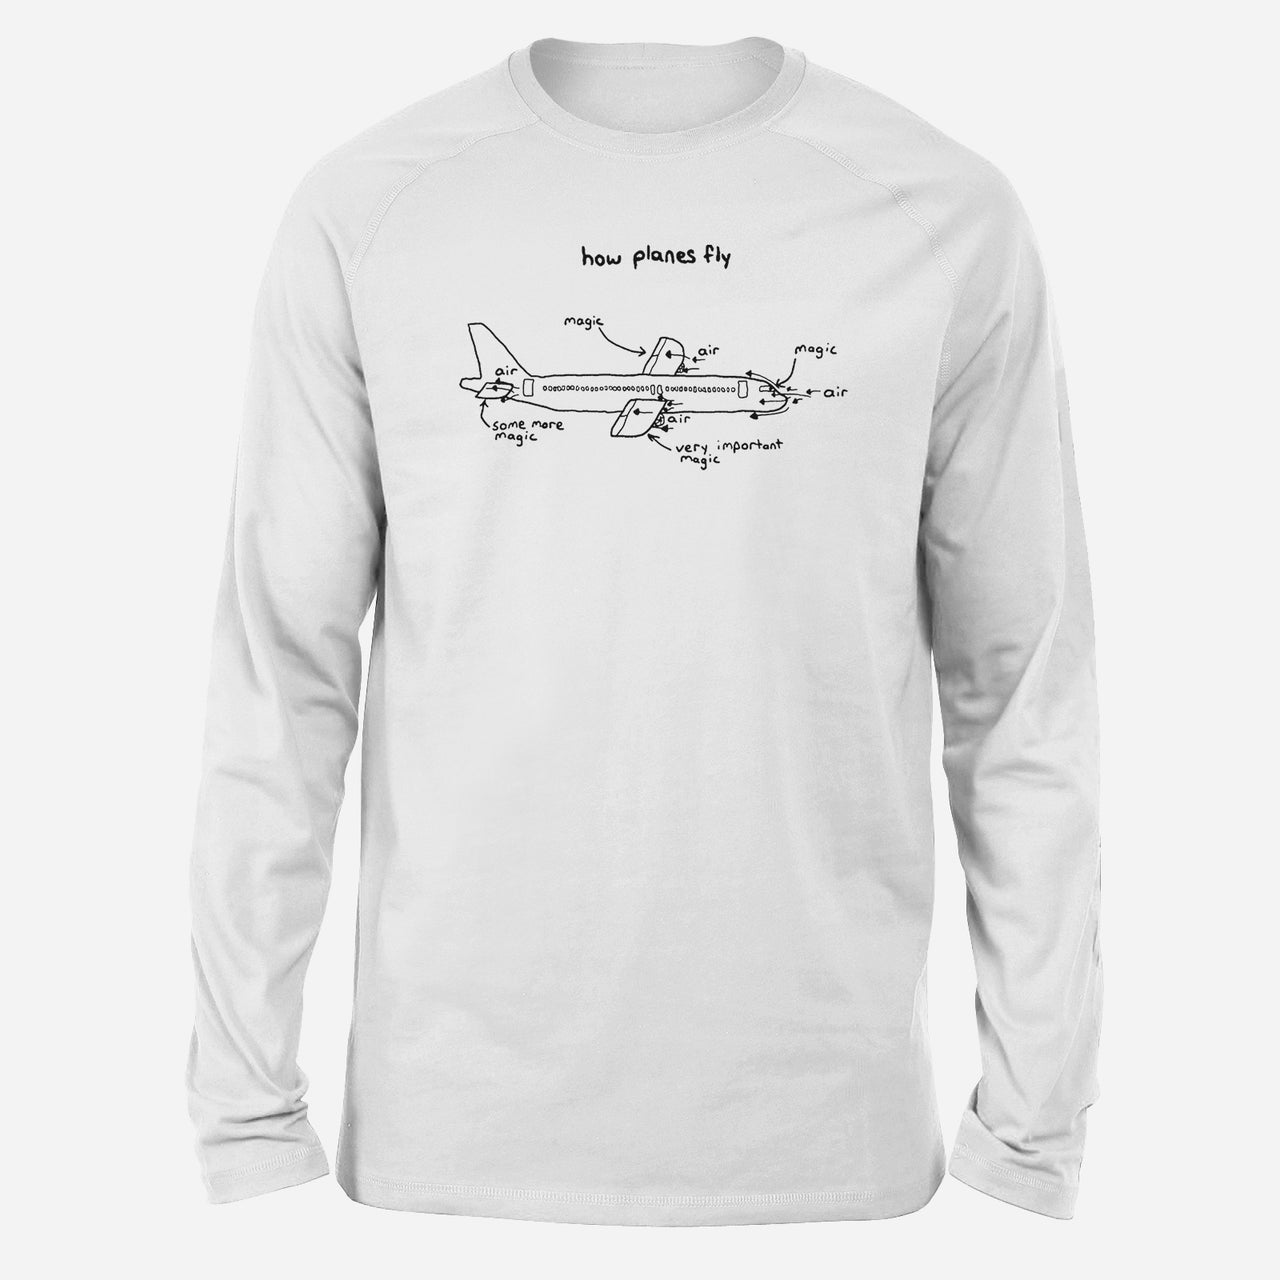 How Planes Fly Designed Long-Sleeve T-Shirts